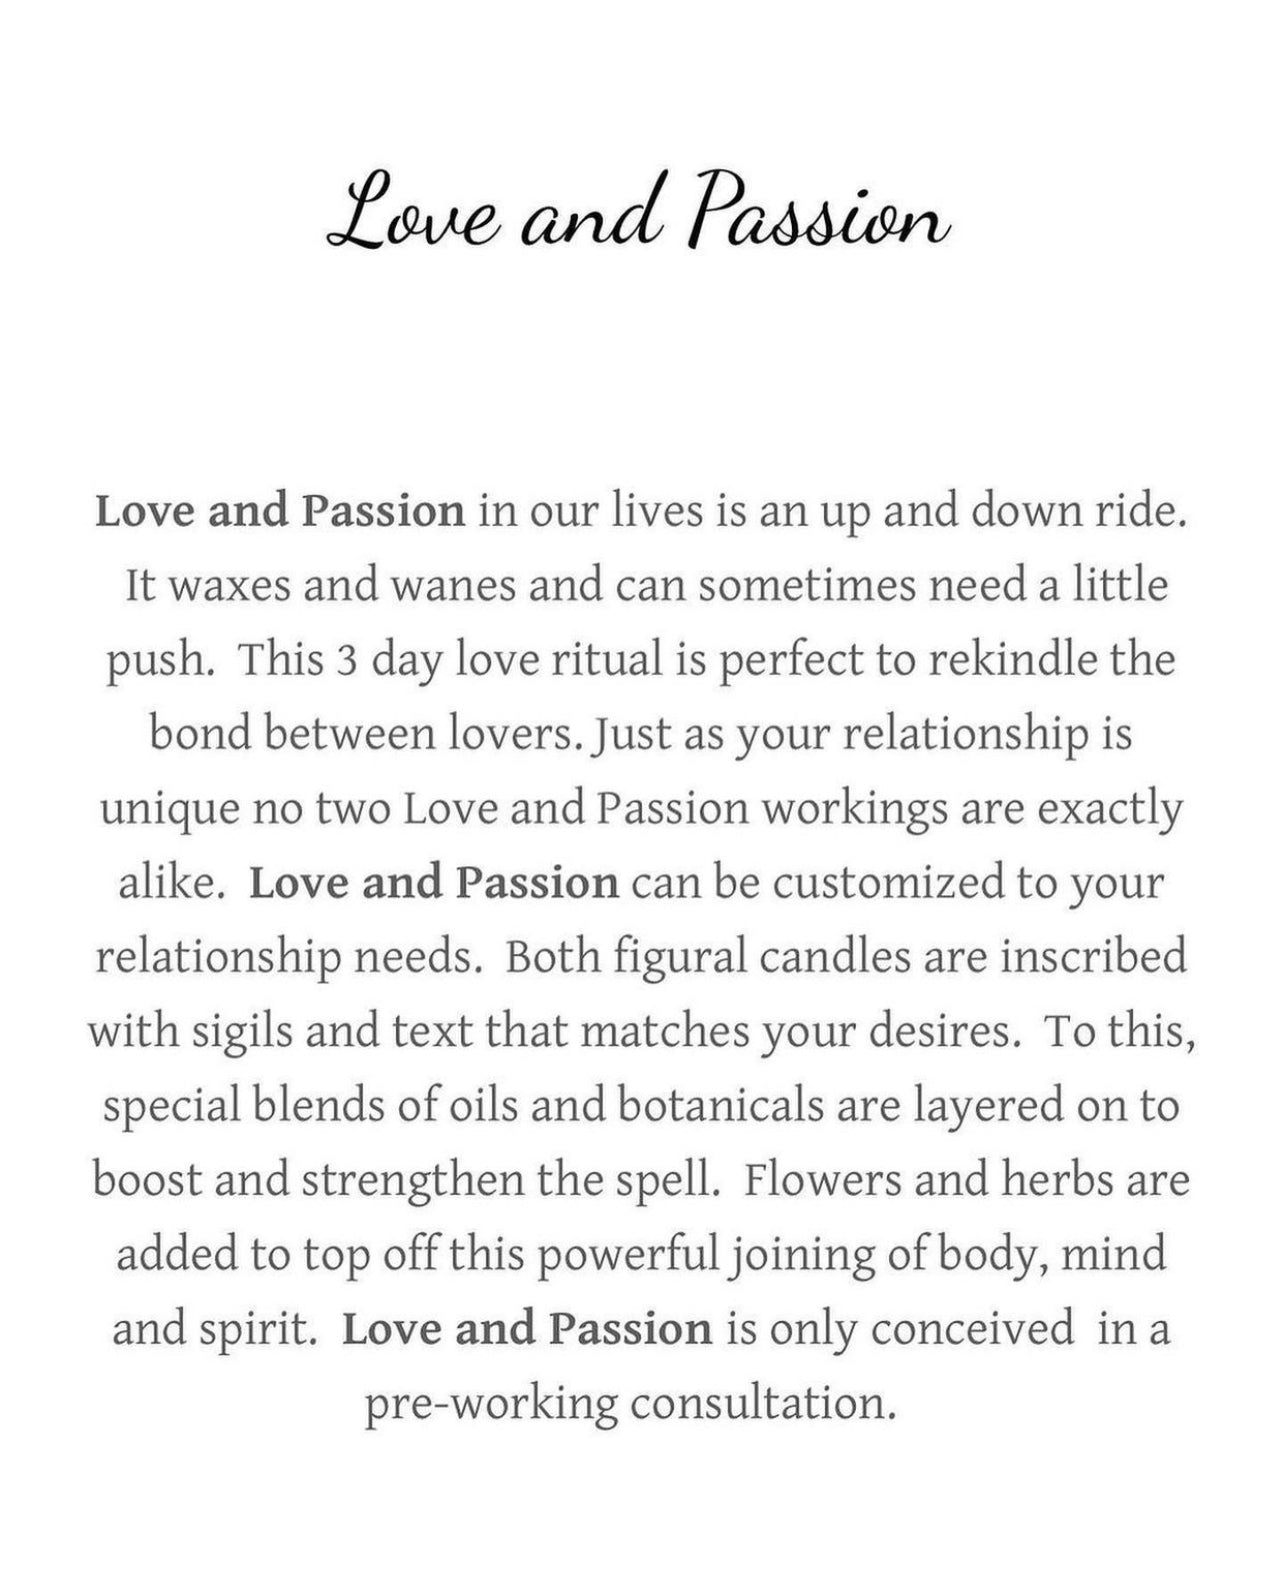 Love and Passion